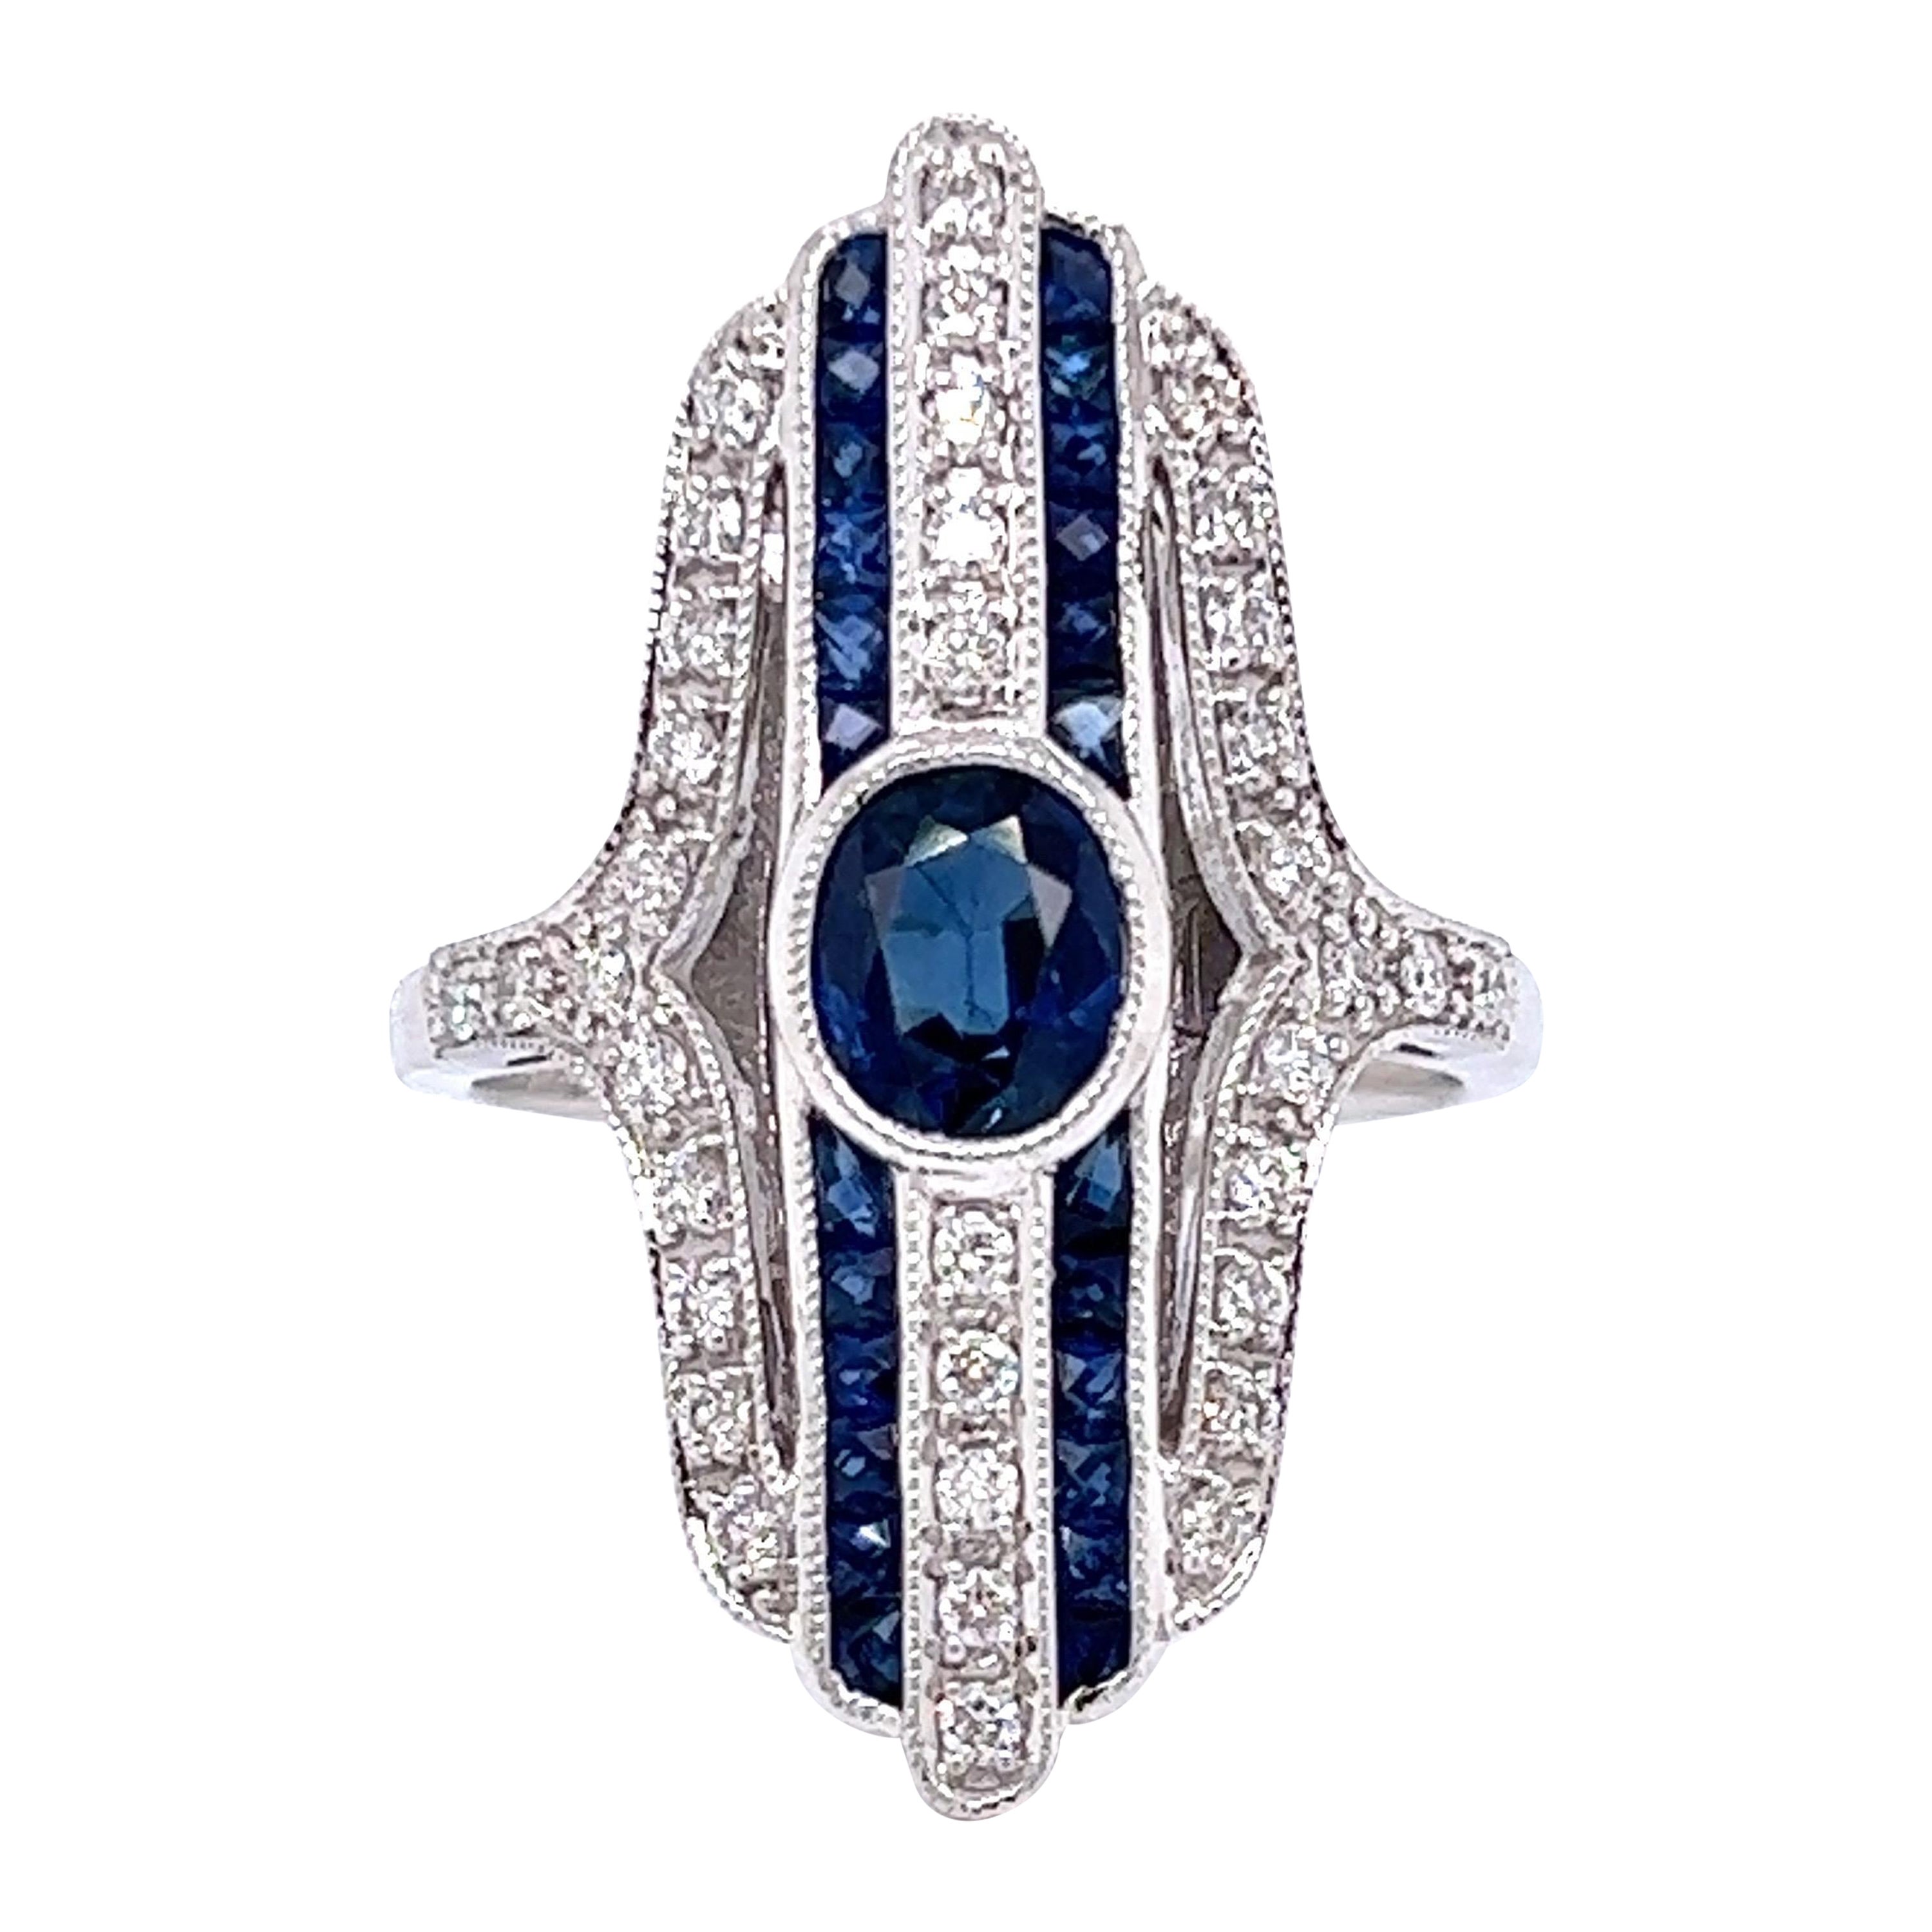 Sapphire, Diamond, and White Gold Ring